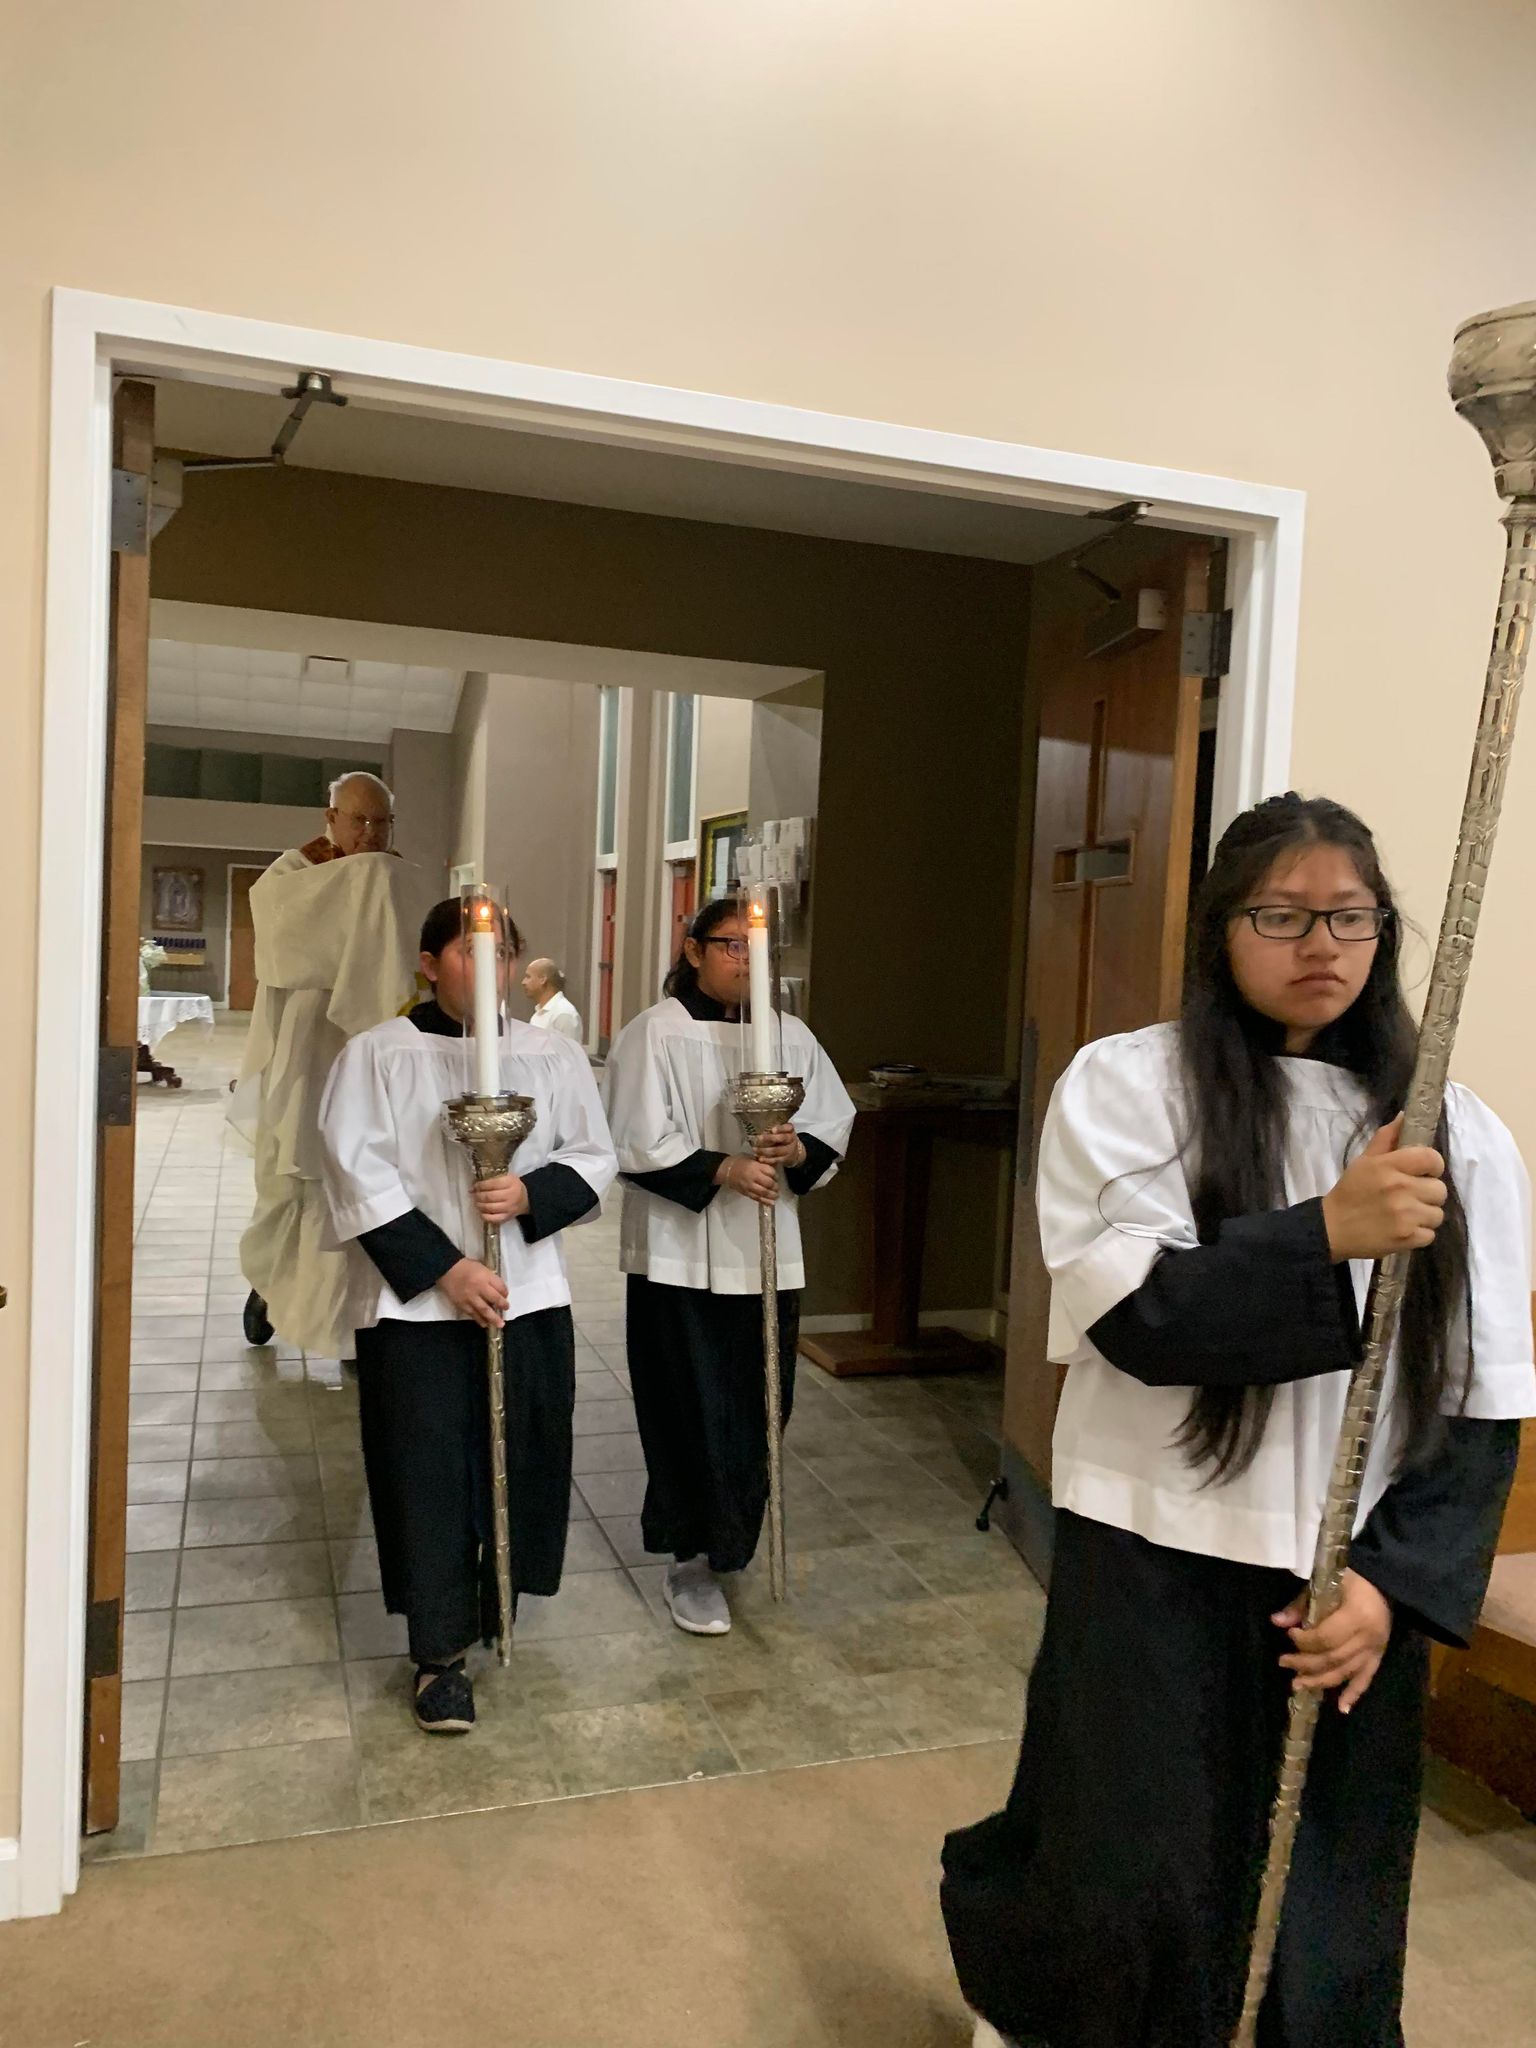 Eucharistic procession from the chapel